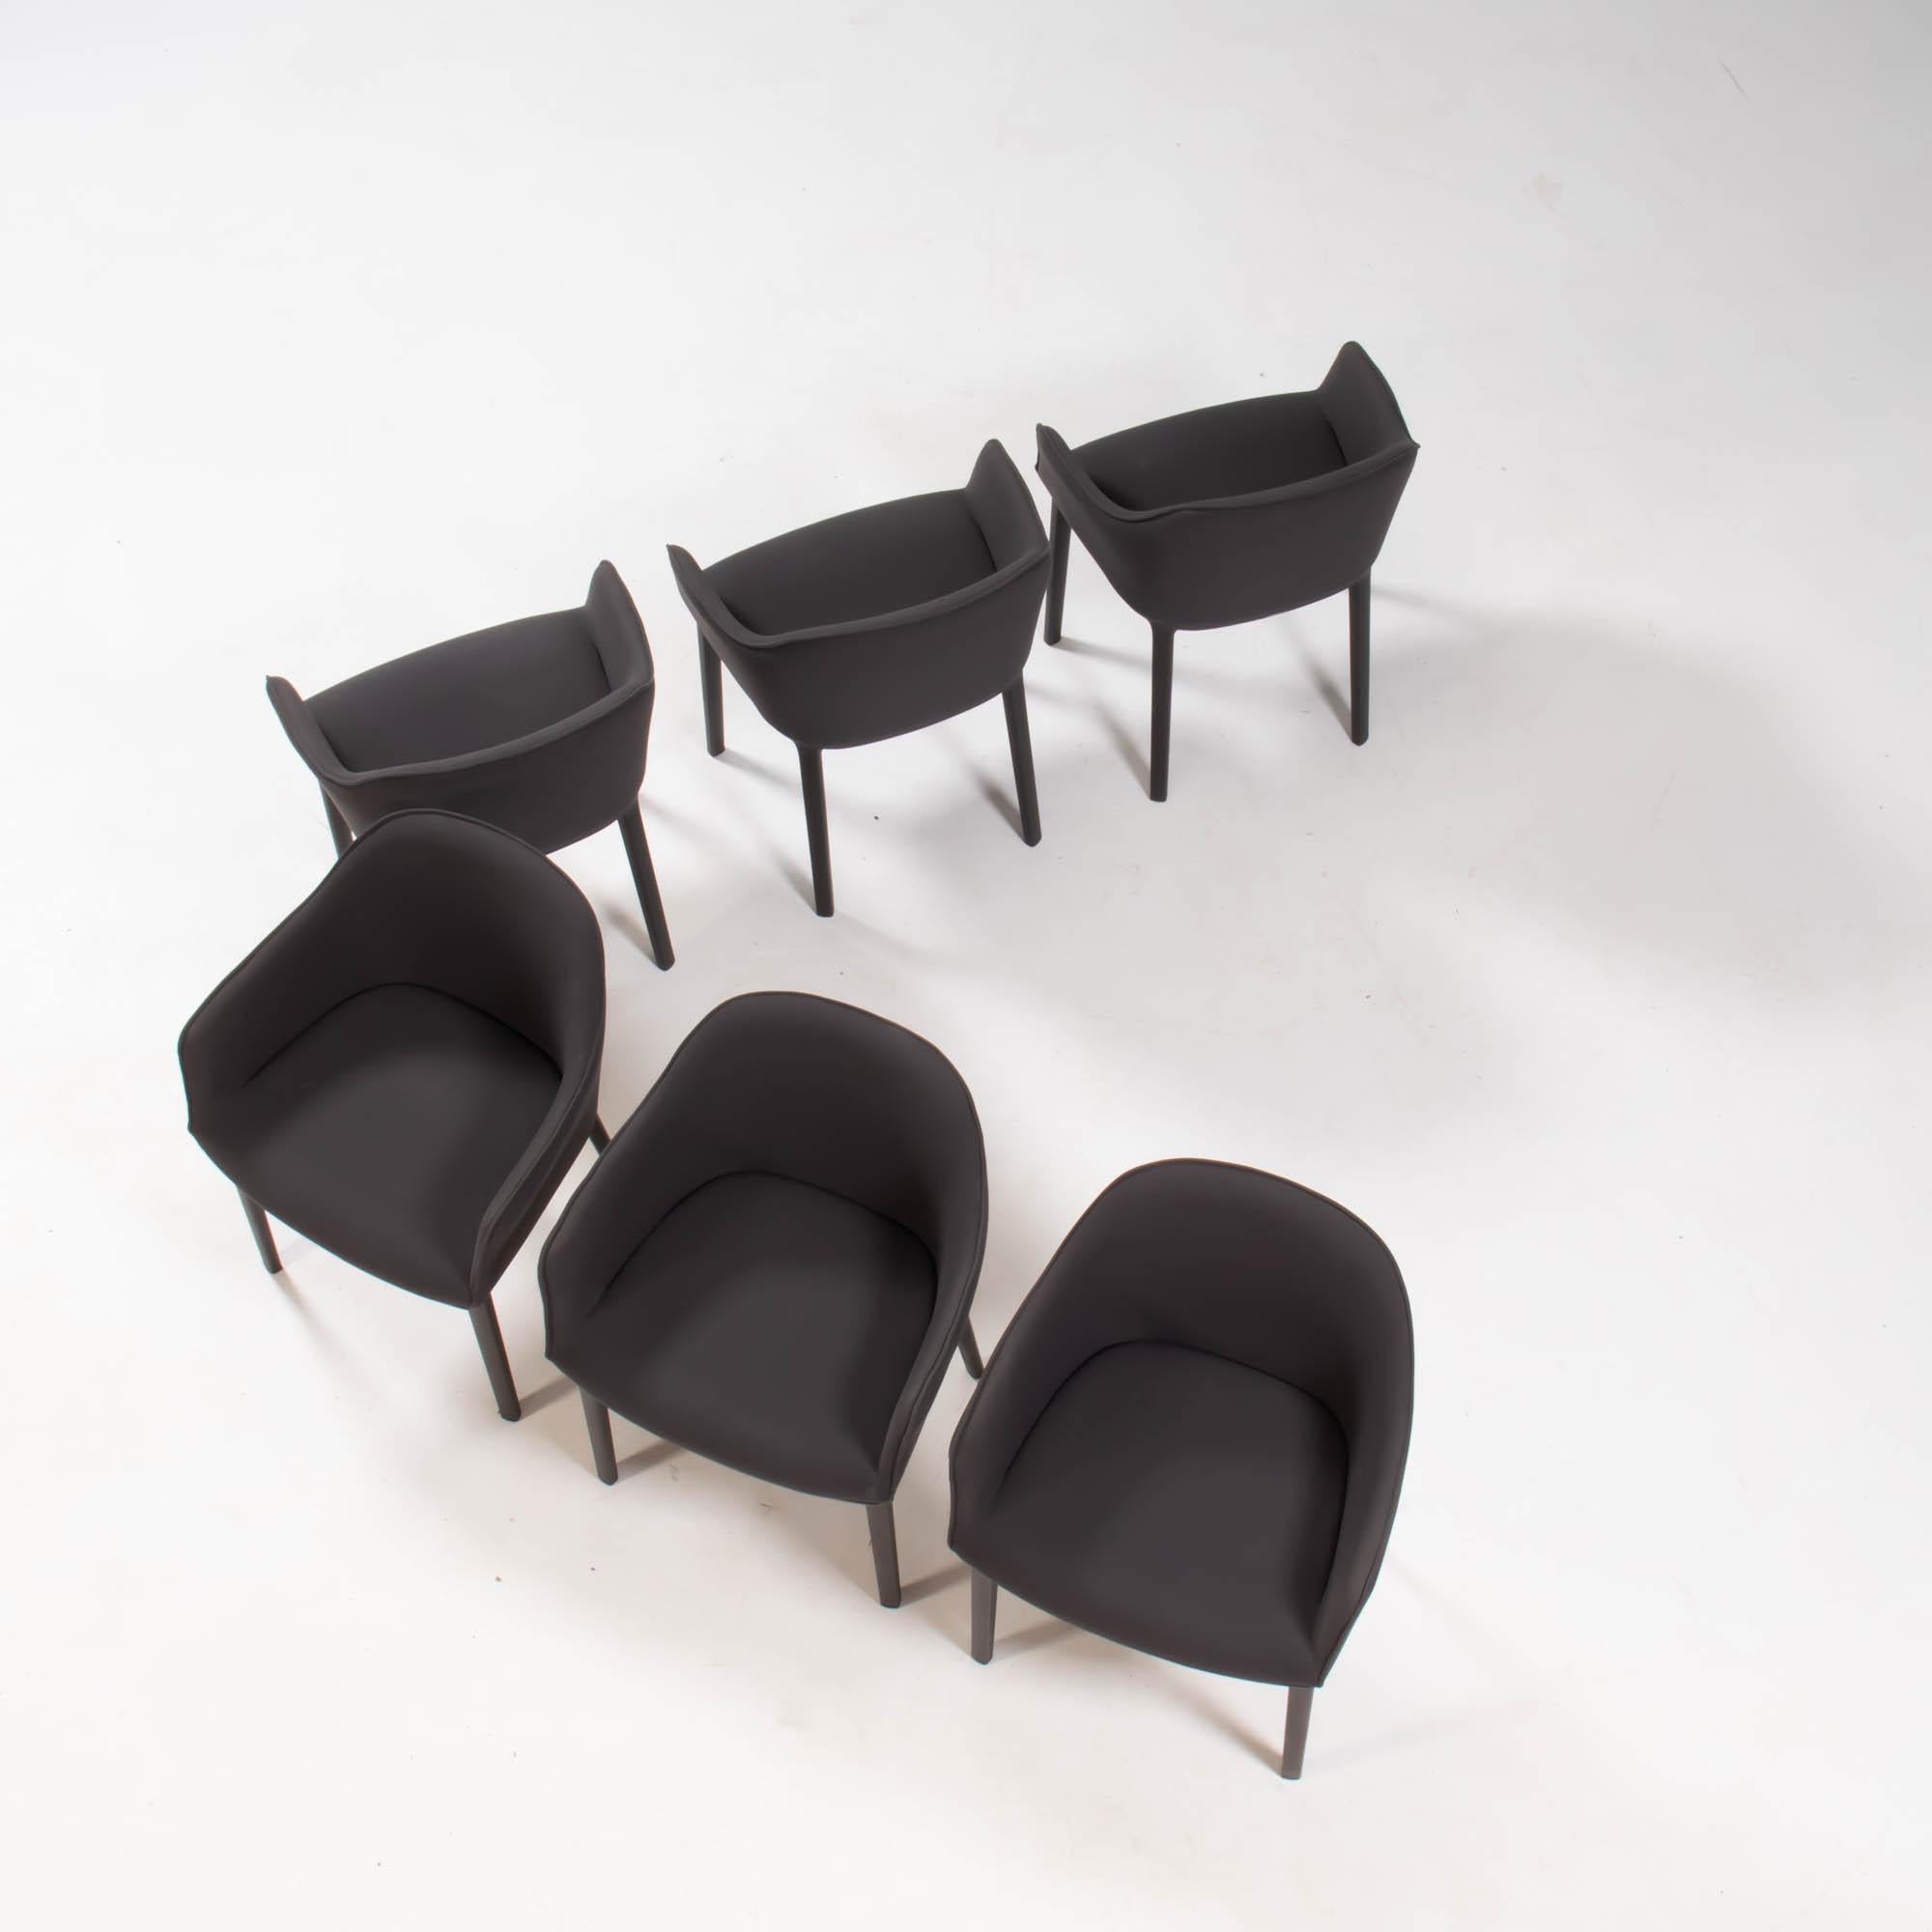 French Vitra by Ronan & Erwan Bouroullec Softshell Black Dining Chairs, Set of 6